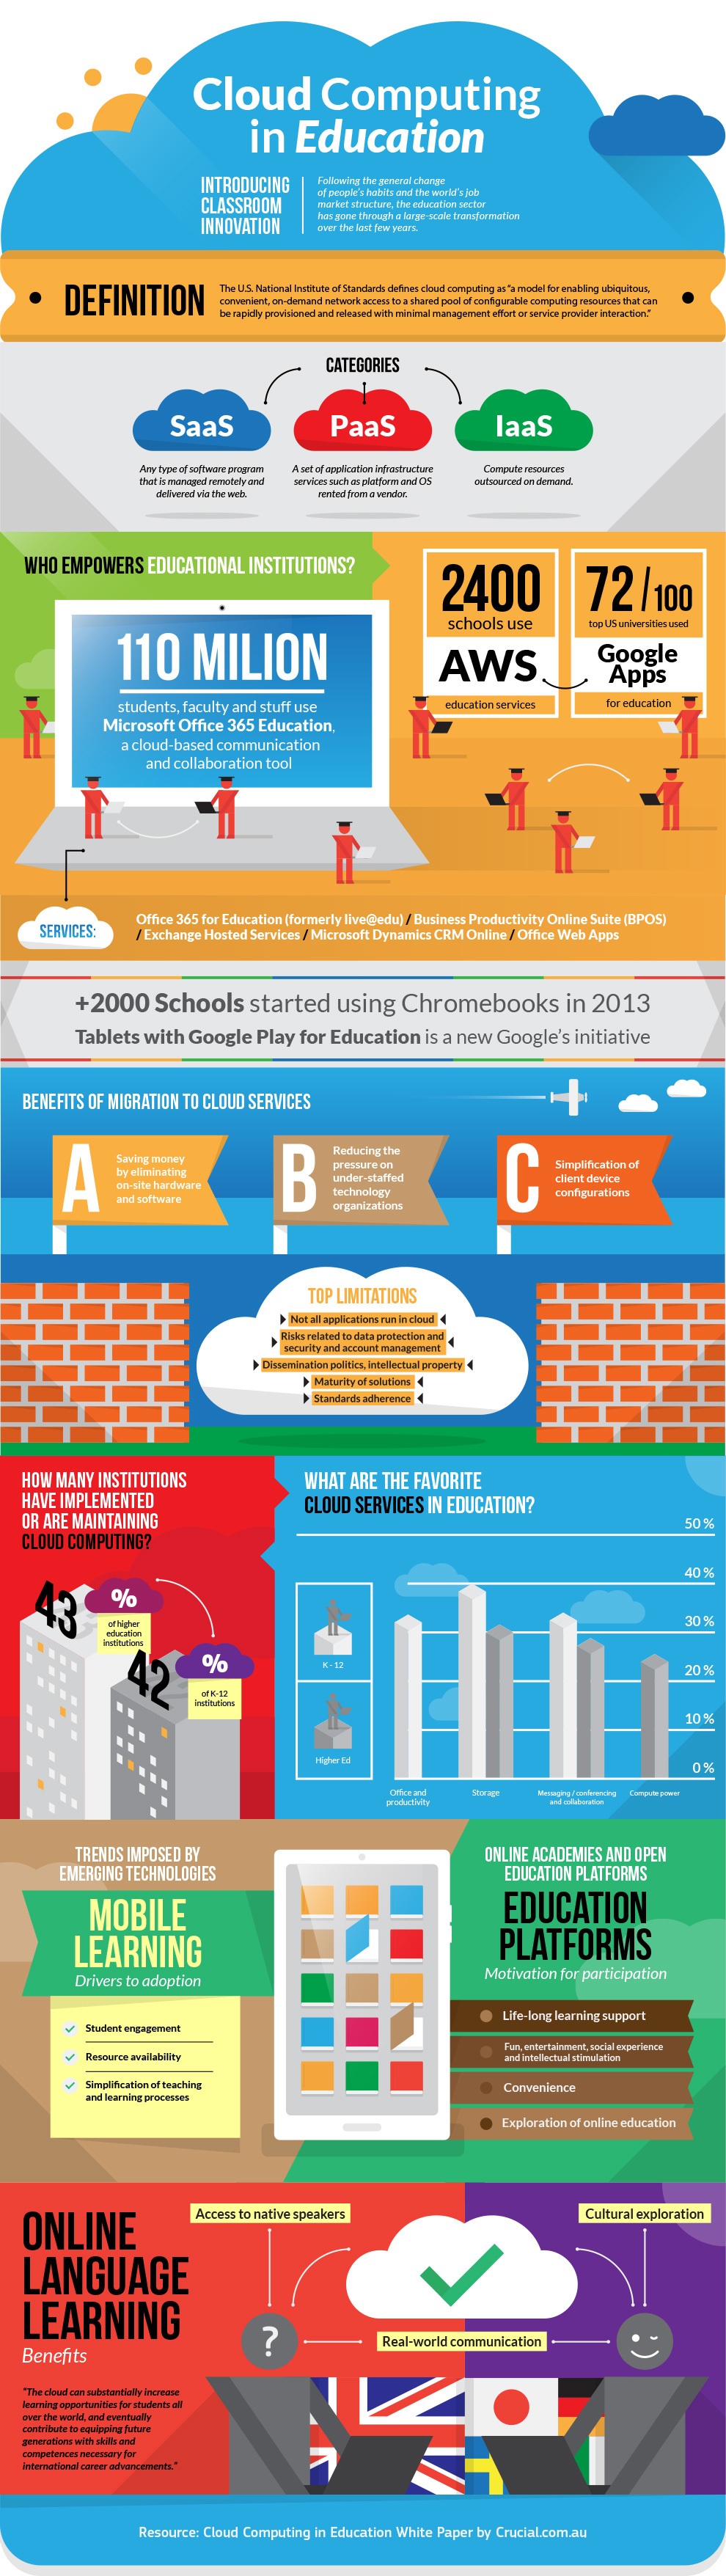 Cloud Computing in Education Infographic